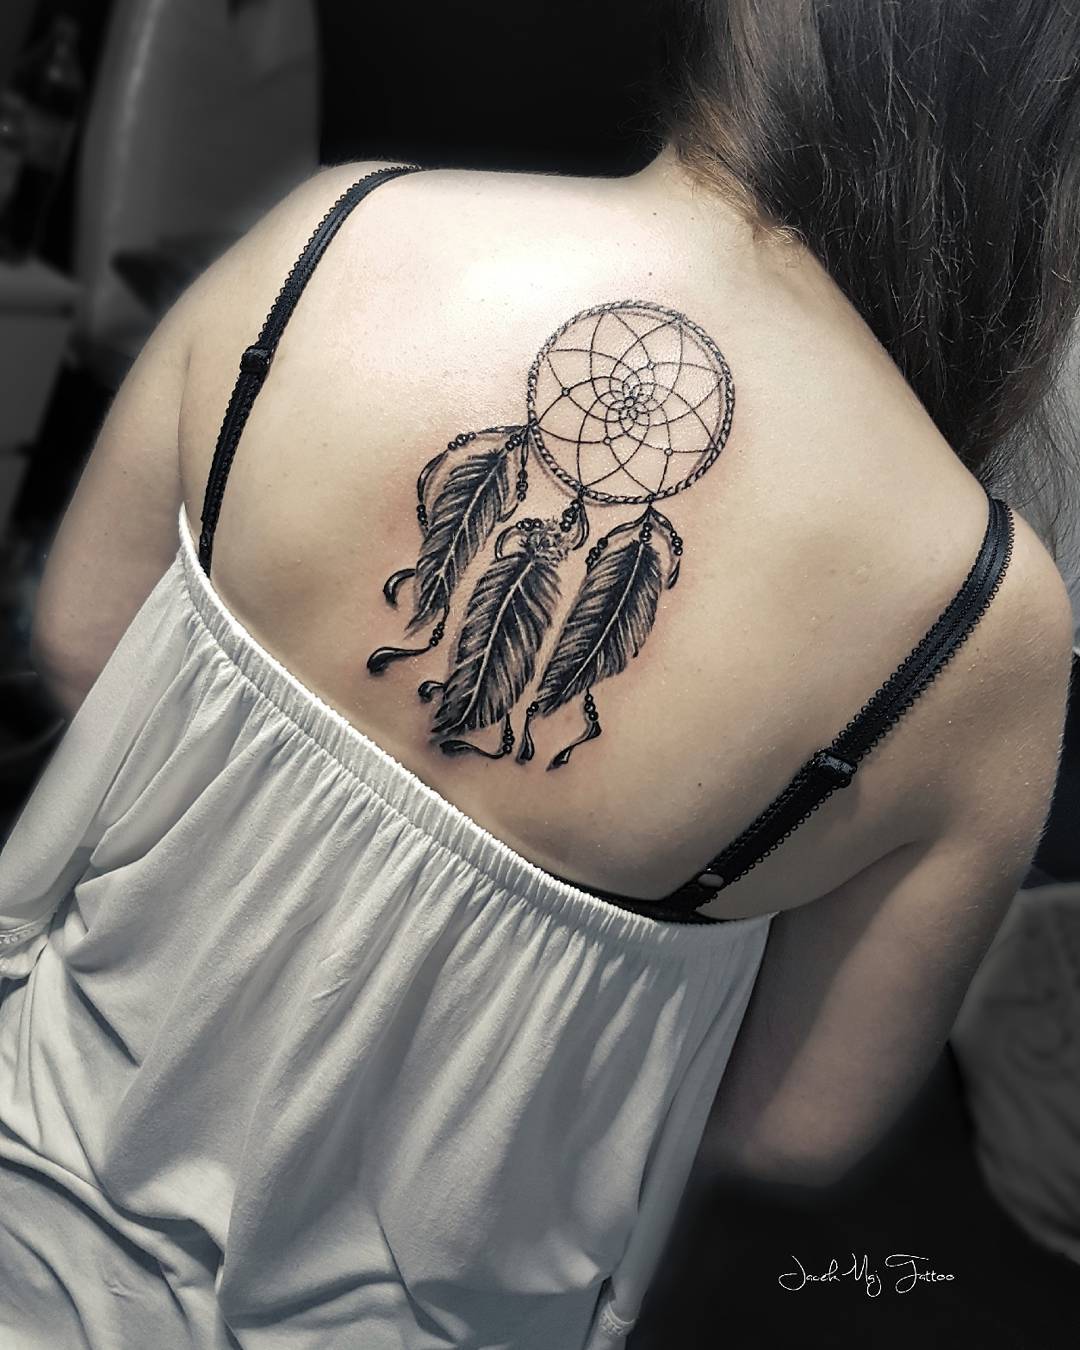 What's a classic dream catcher tattoo? Well, it's basically just a regular dream catcher, but with the addition of feathers and beads. Sometimes the beauty is in simplicity, so go for it.